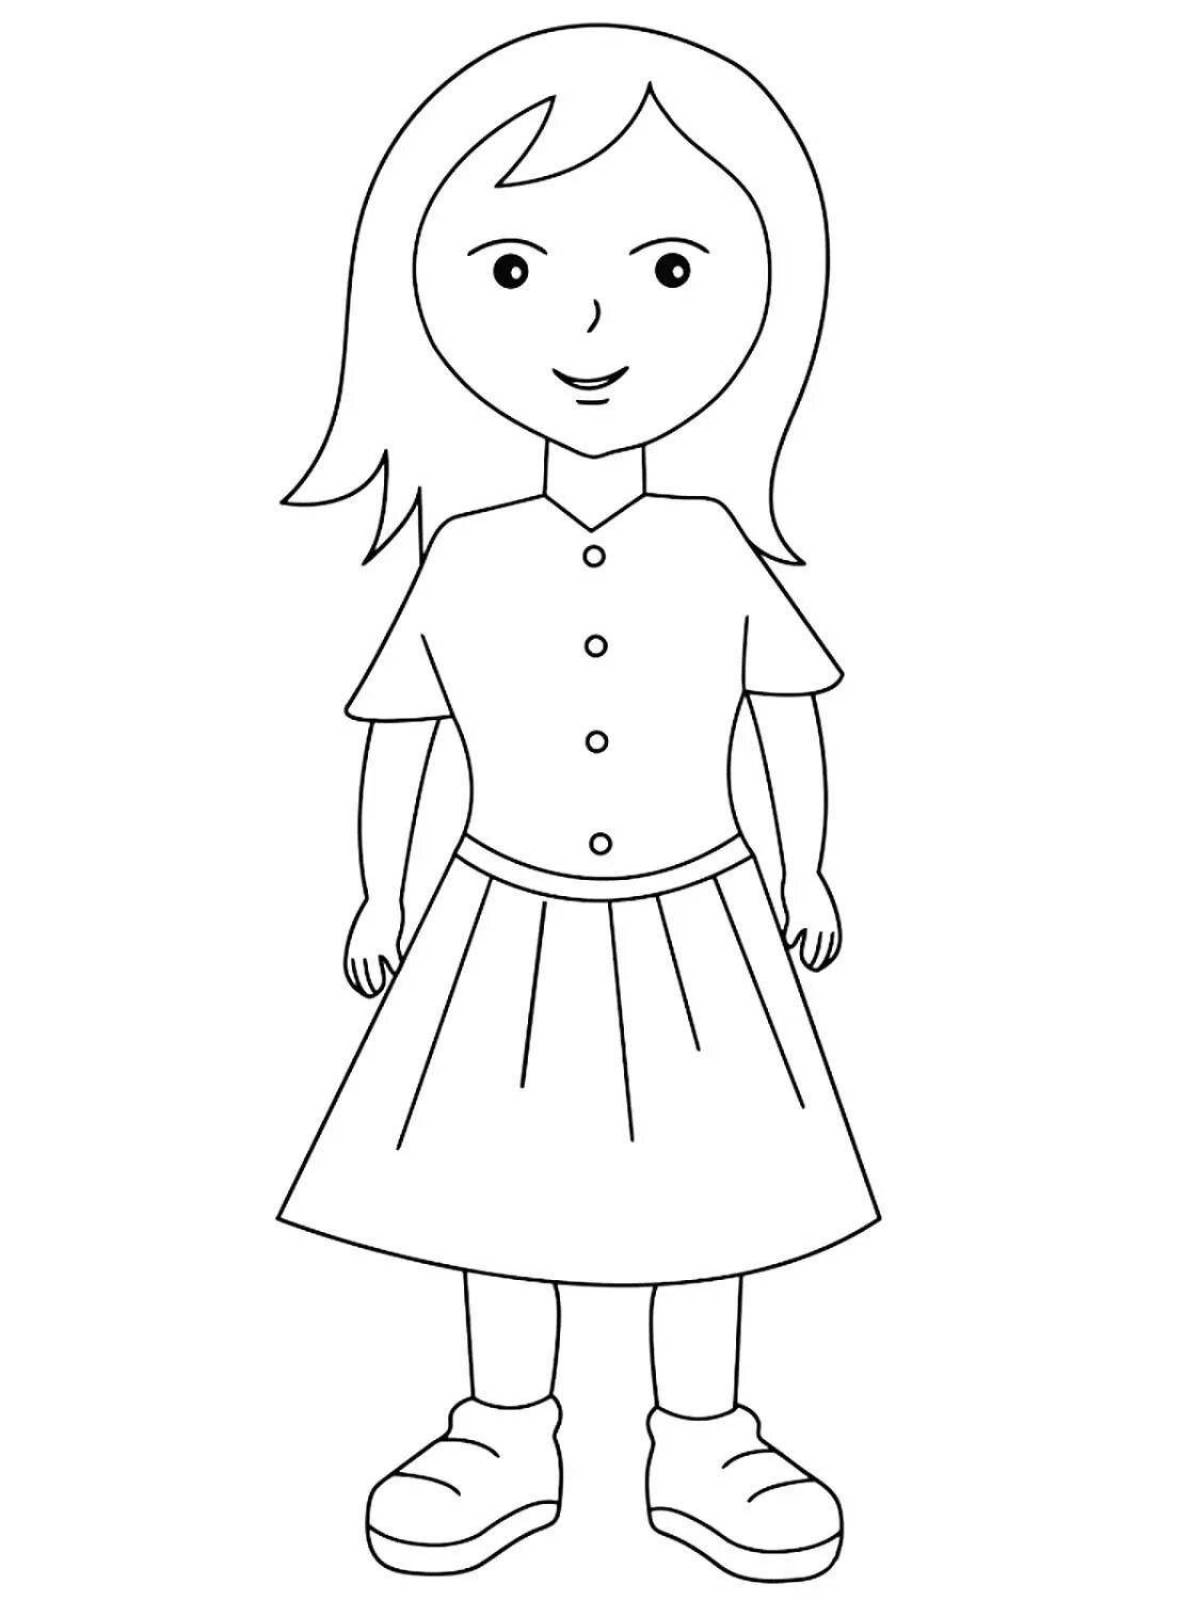 Coloring page violent woman for children